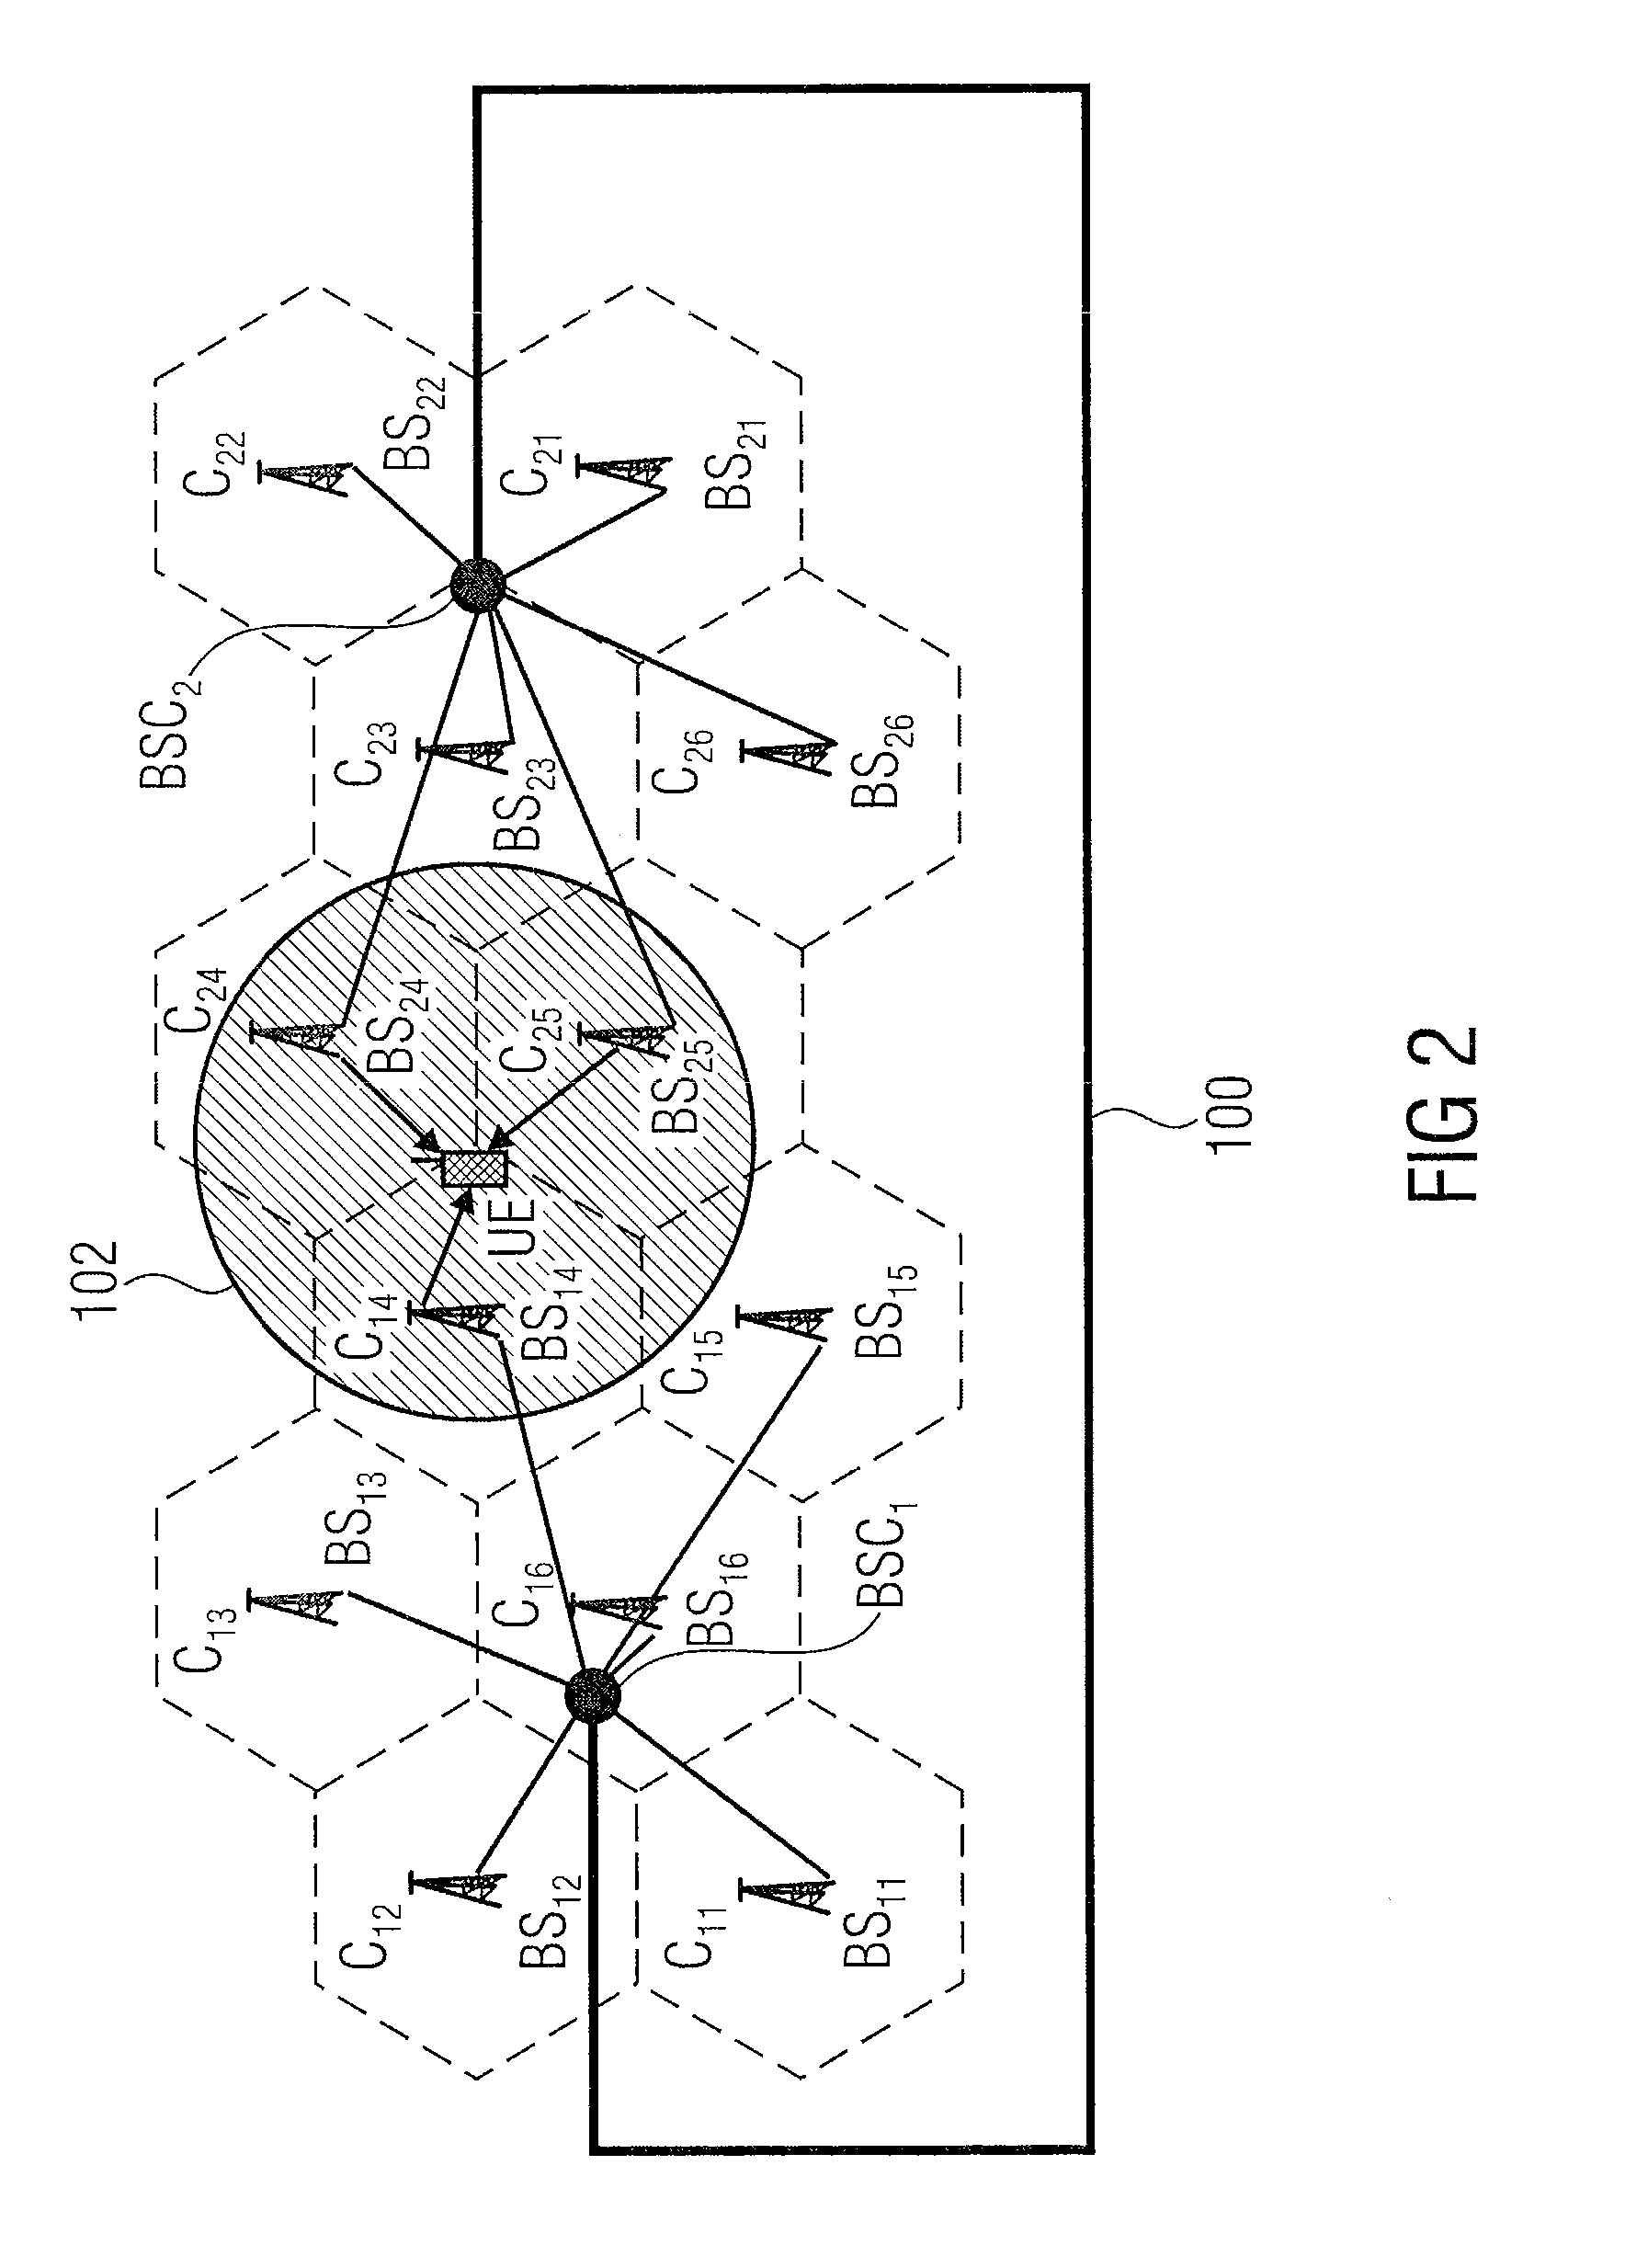 Method for coordinated multipoint (COMP) transmission/reception in wireless communication networks with reconfiguration capability